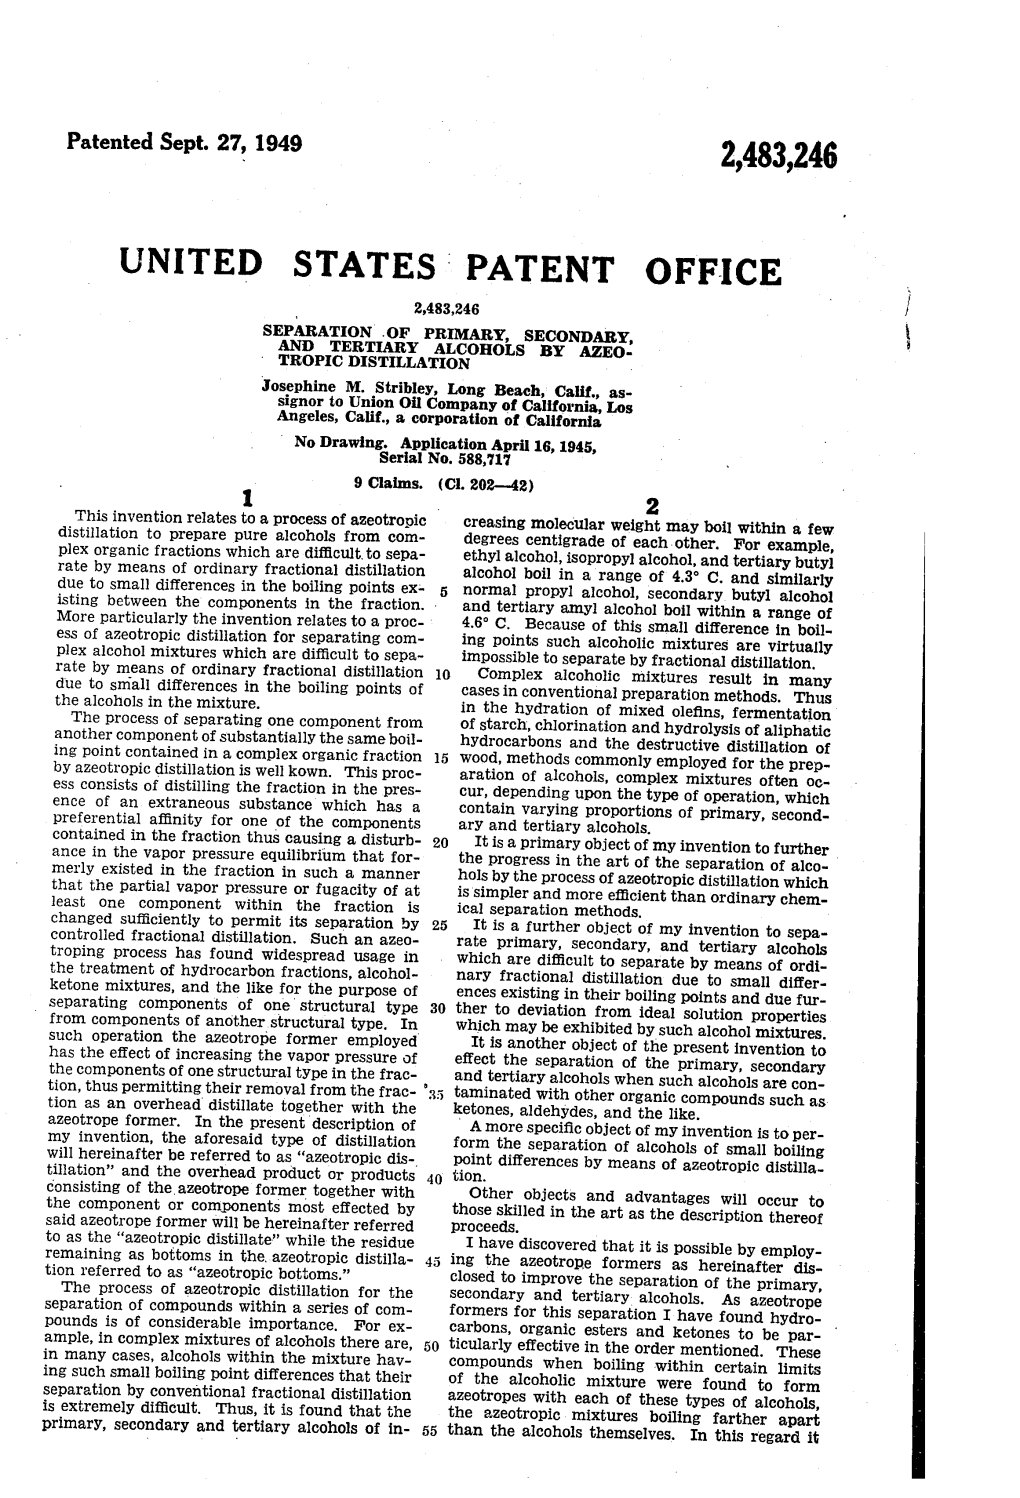 UNITED STATES PATENT OFFICE 2,483,246 SEPARATION of PRIMARY, SECONDARY, and TERTARY ALCOHOLS by AWAEO TROPC DISTILLATION Josephine M